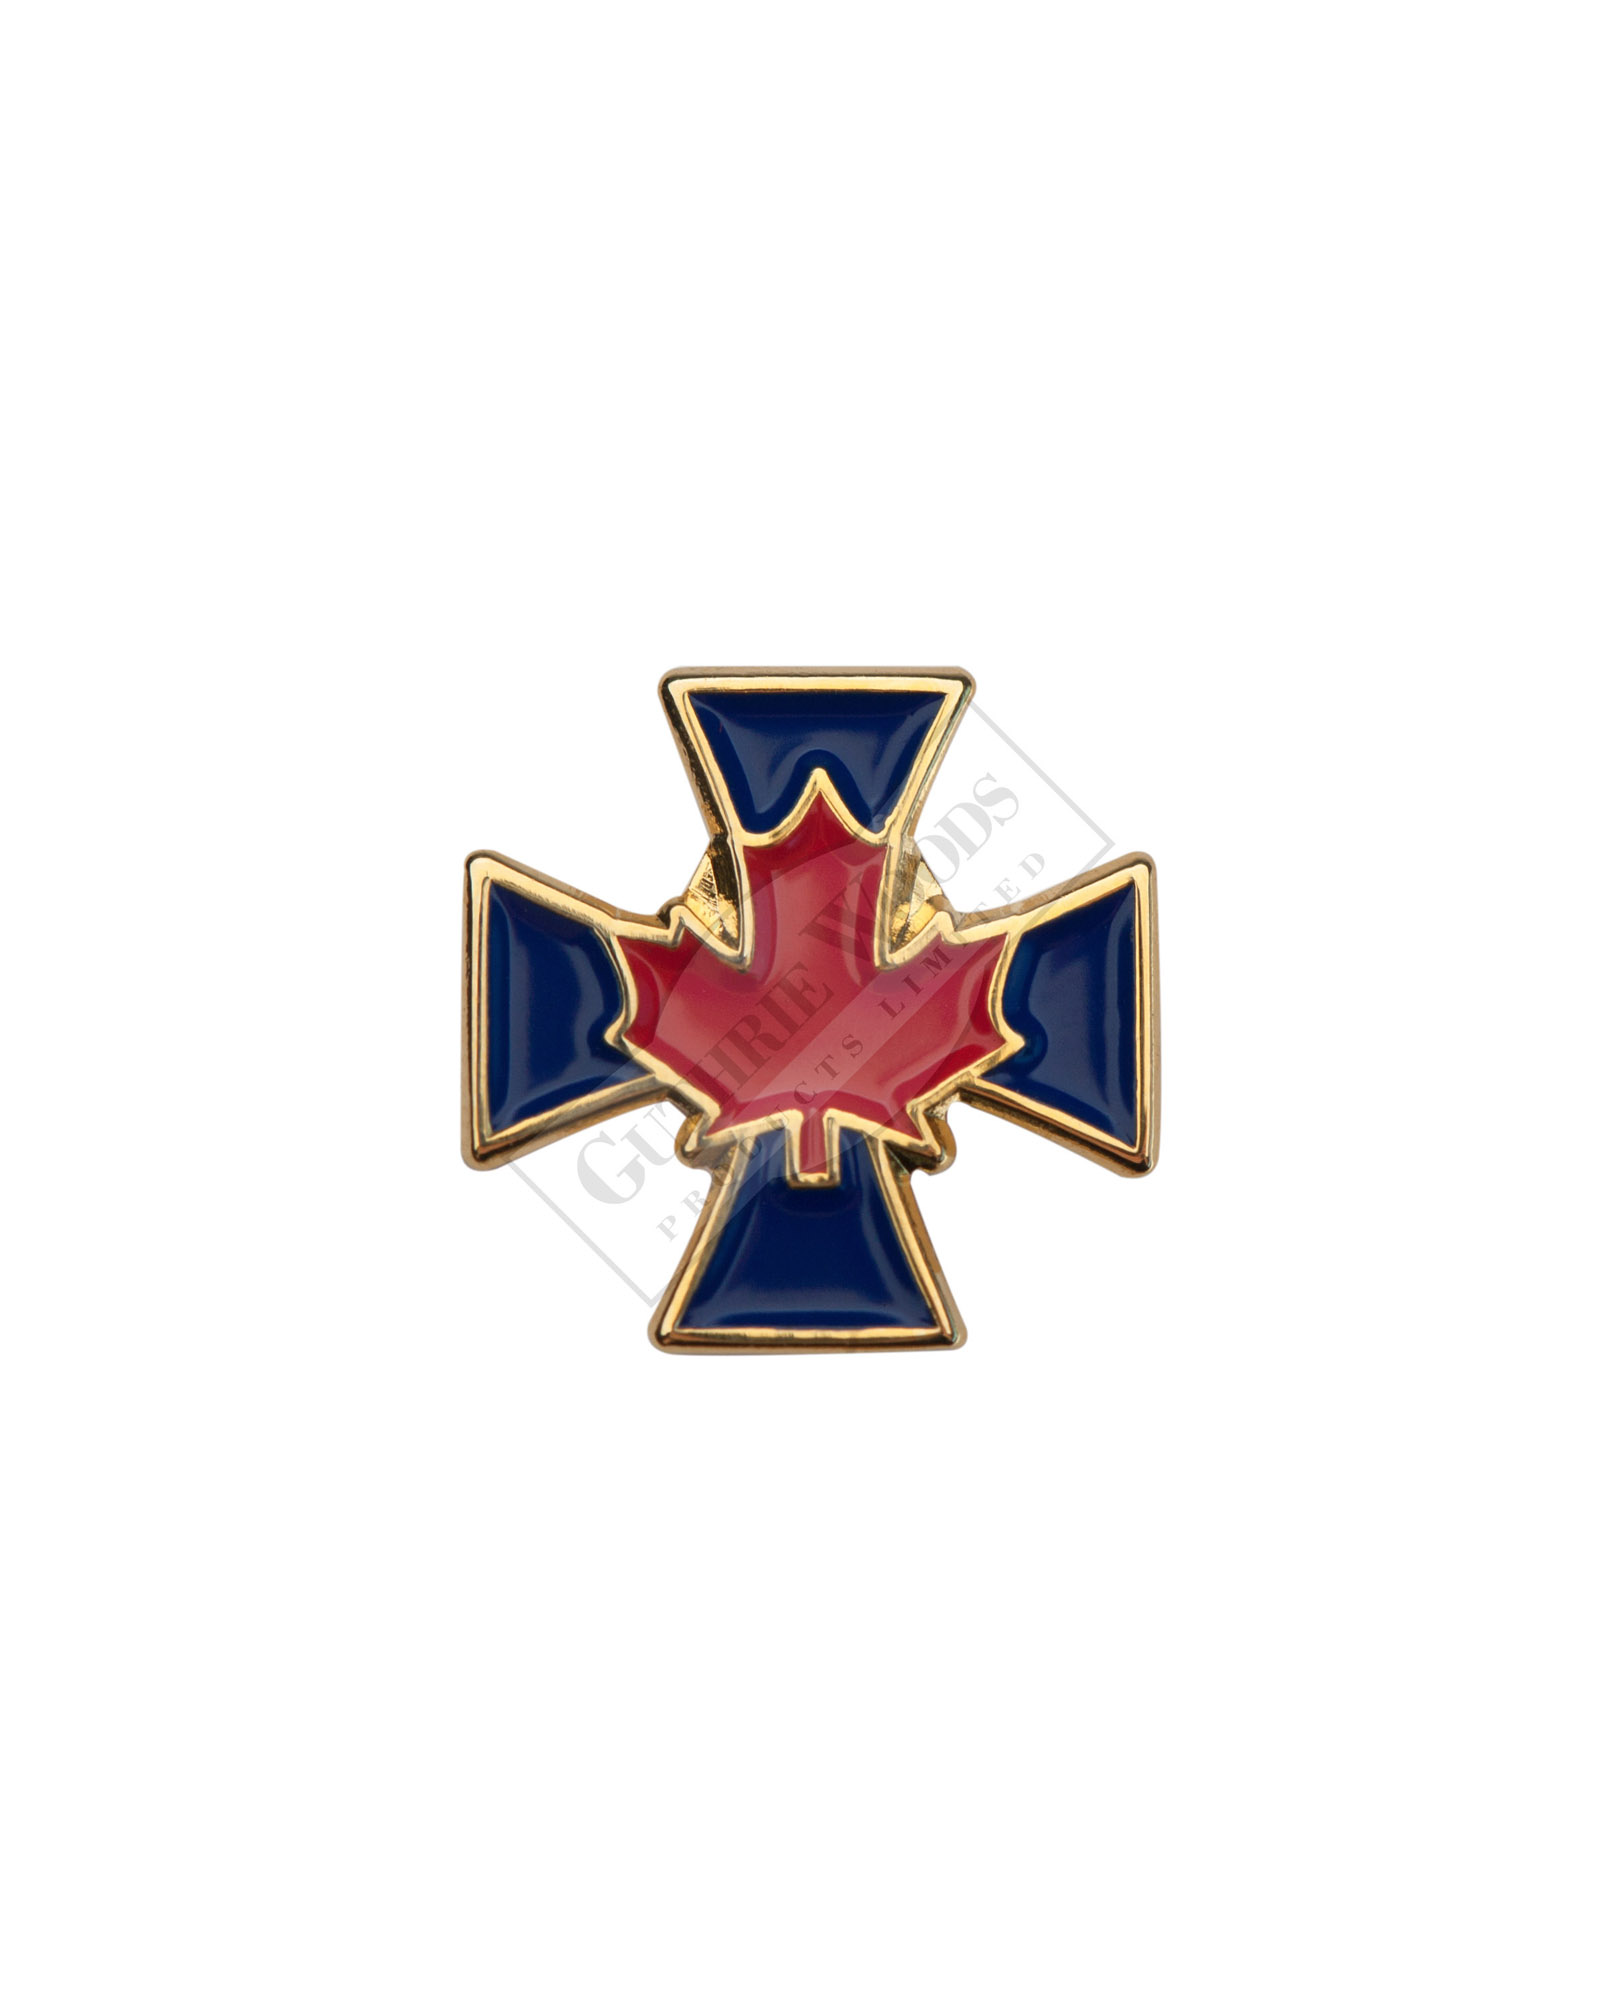 Order of Military Merit | Order of Merit of the Police Forces – Commander #247-COM